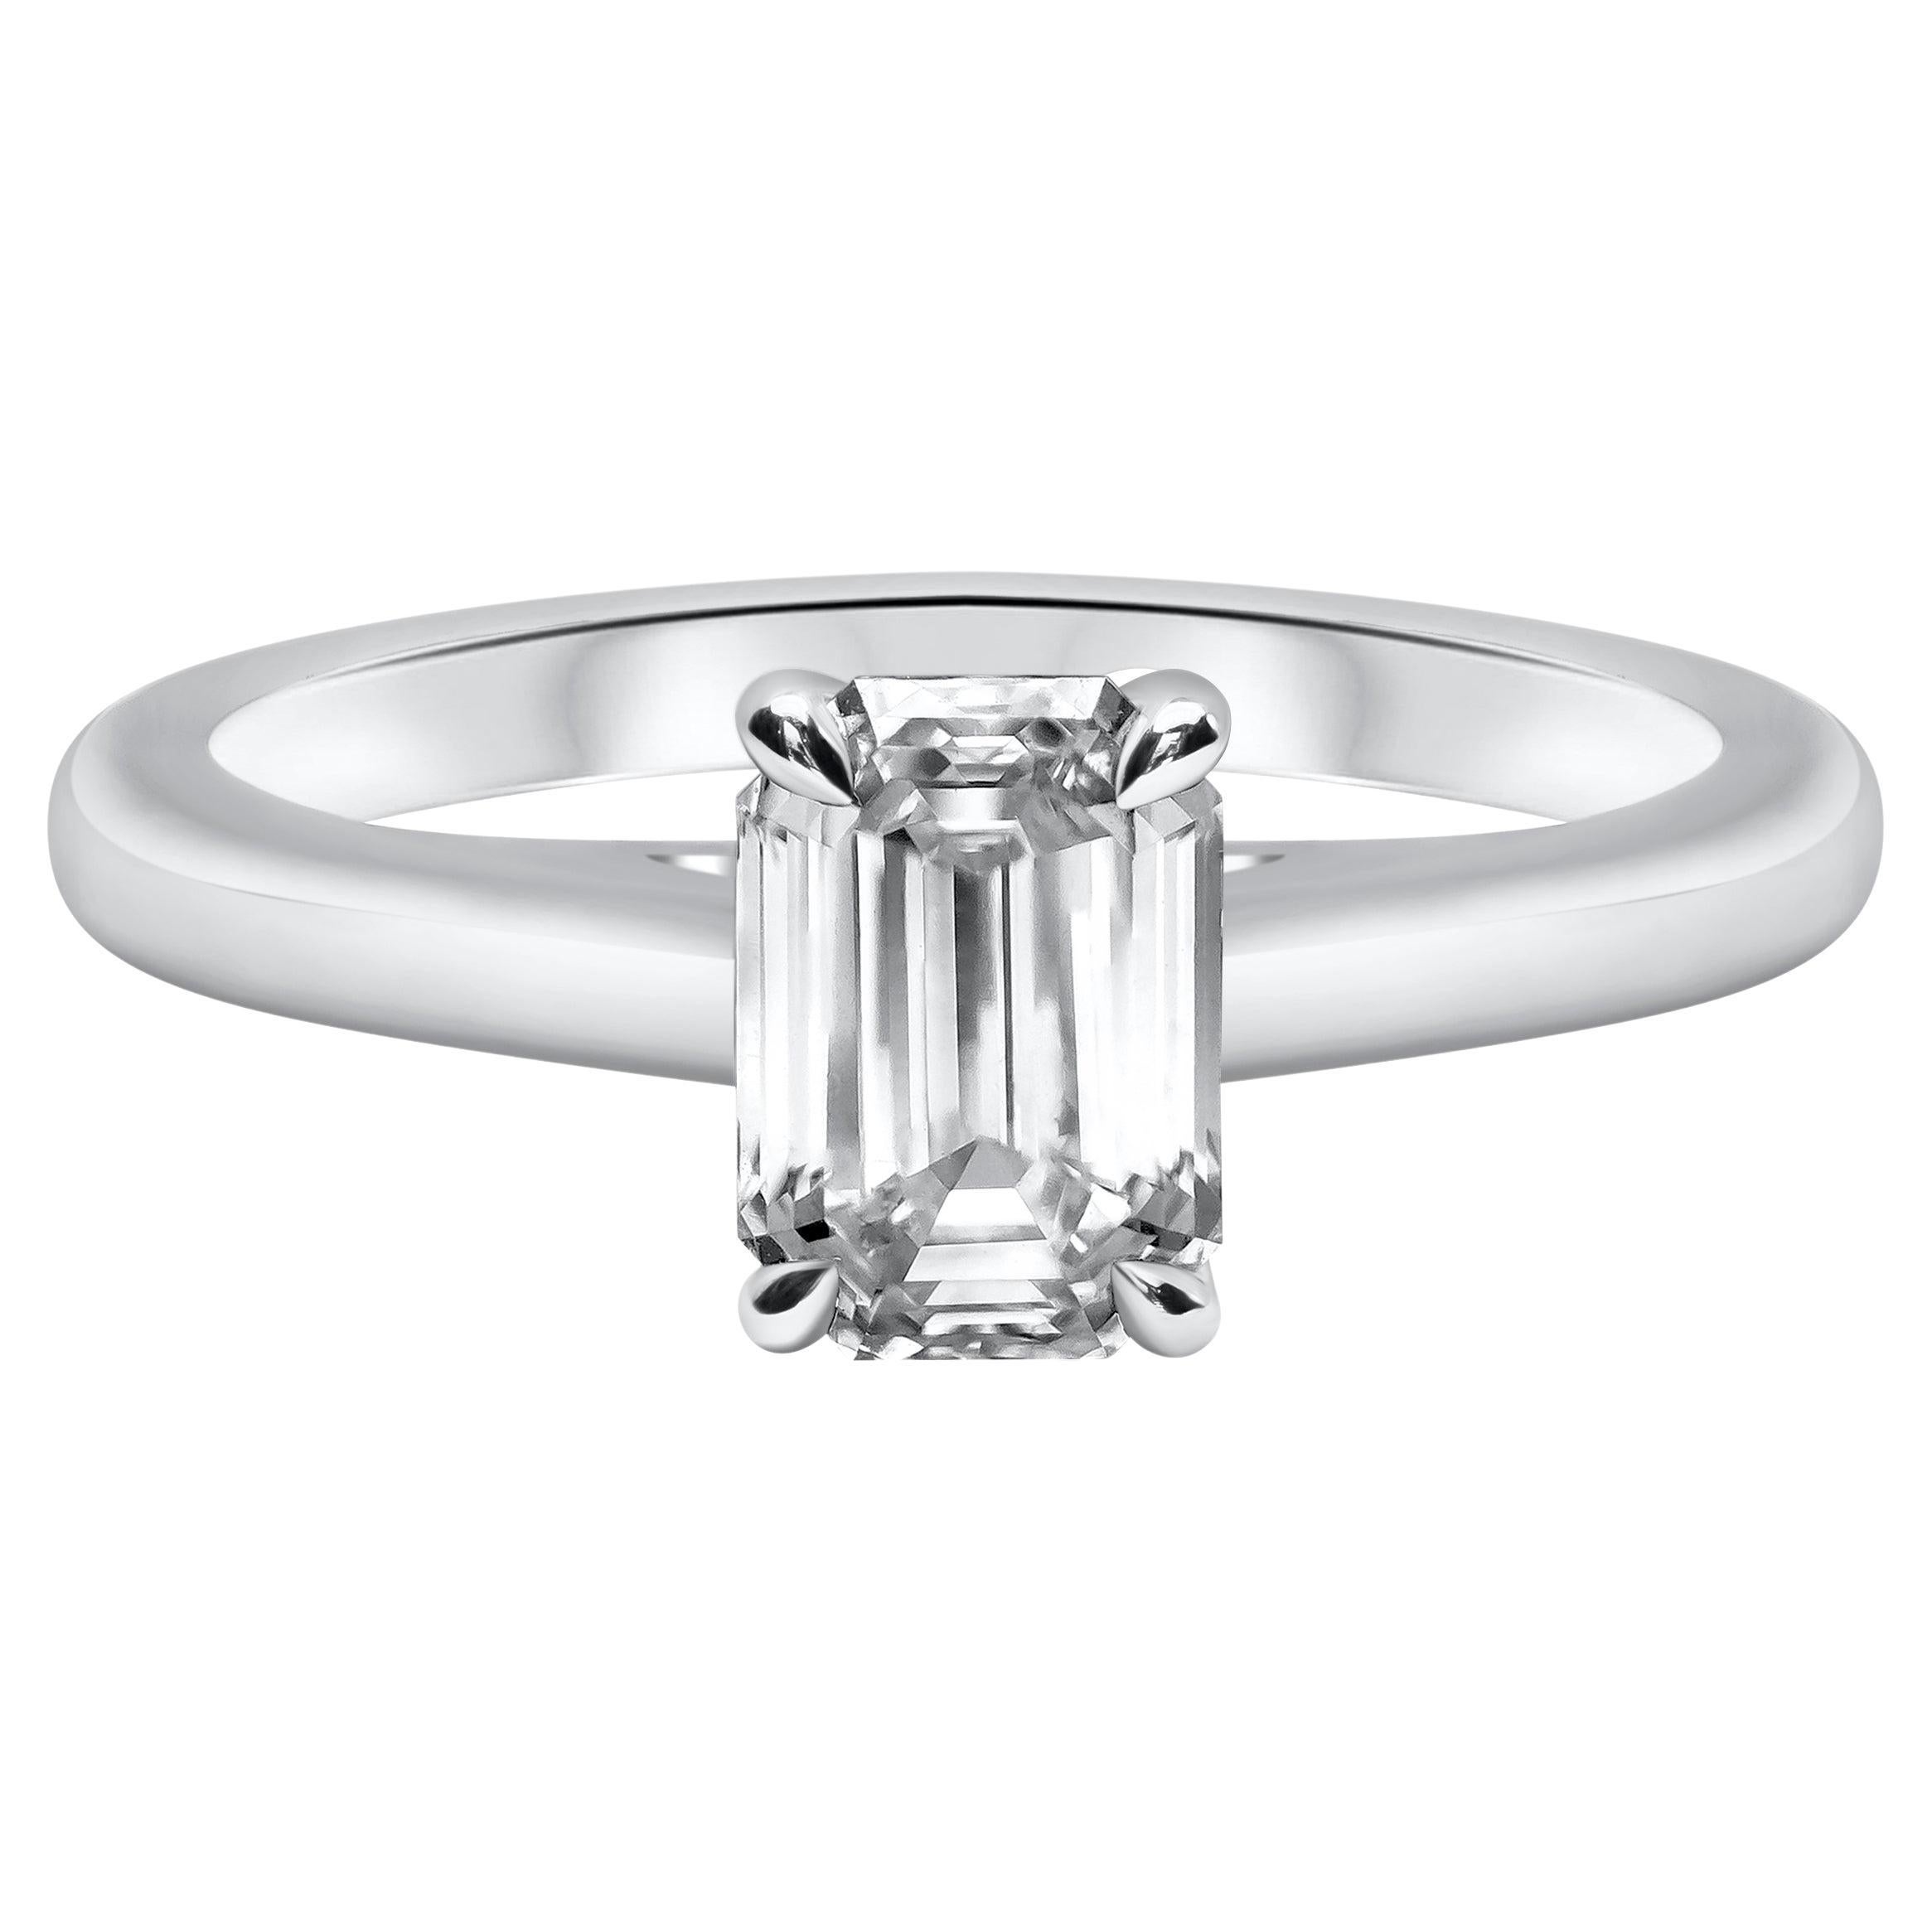 GIA Certified 1.21 Carats Total Emerald Cut Diamond Solitaire Engagement Ring